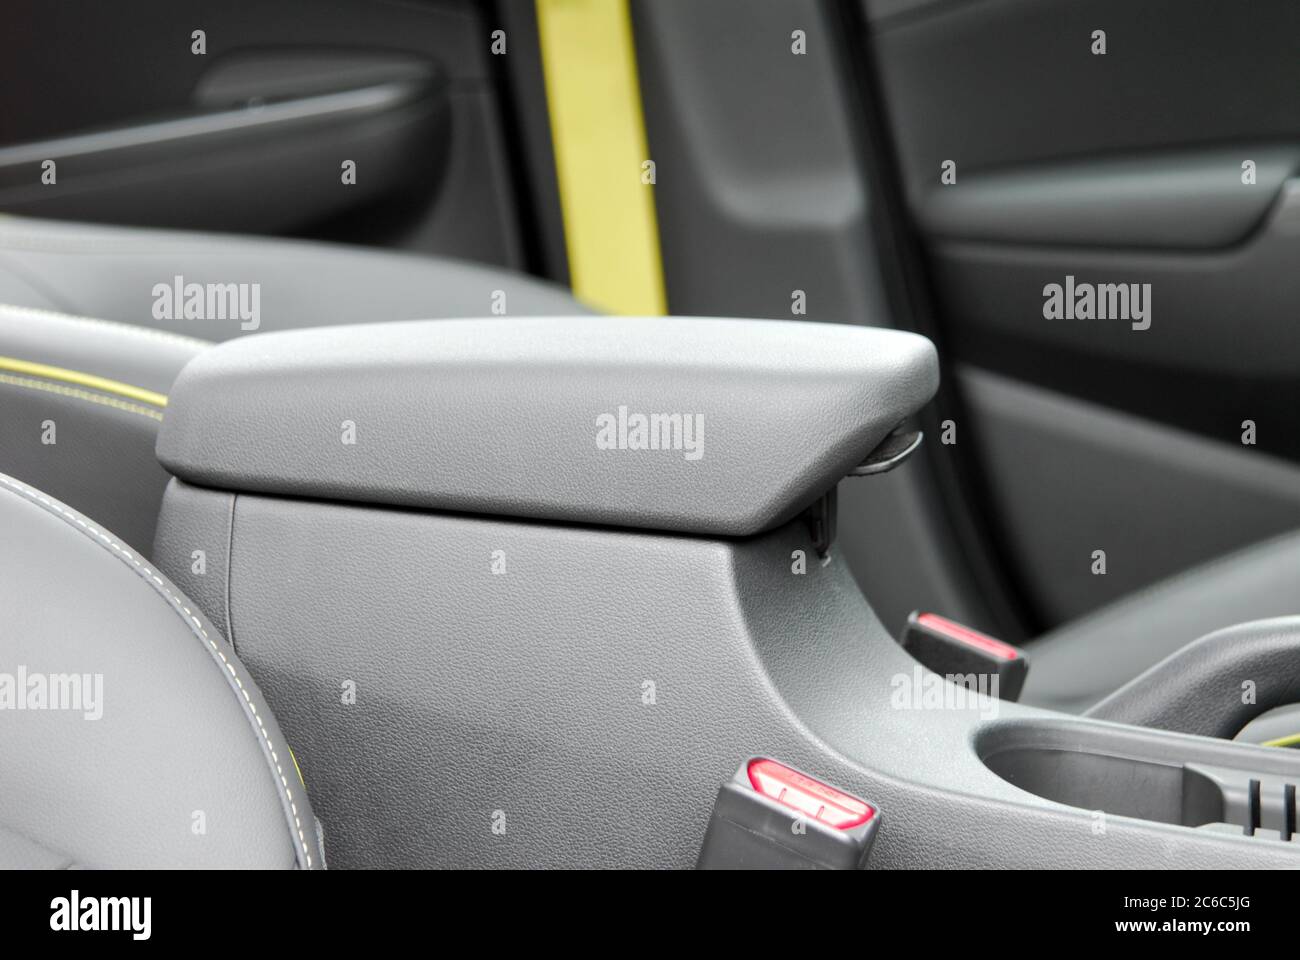 Armrest in the luxury passenger car between front seats. Stock Photo